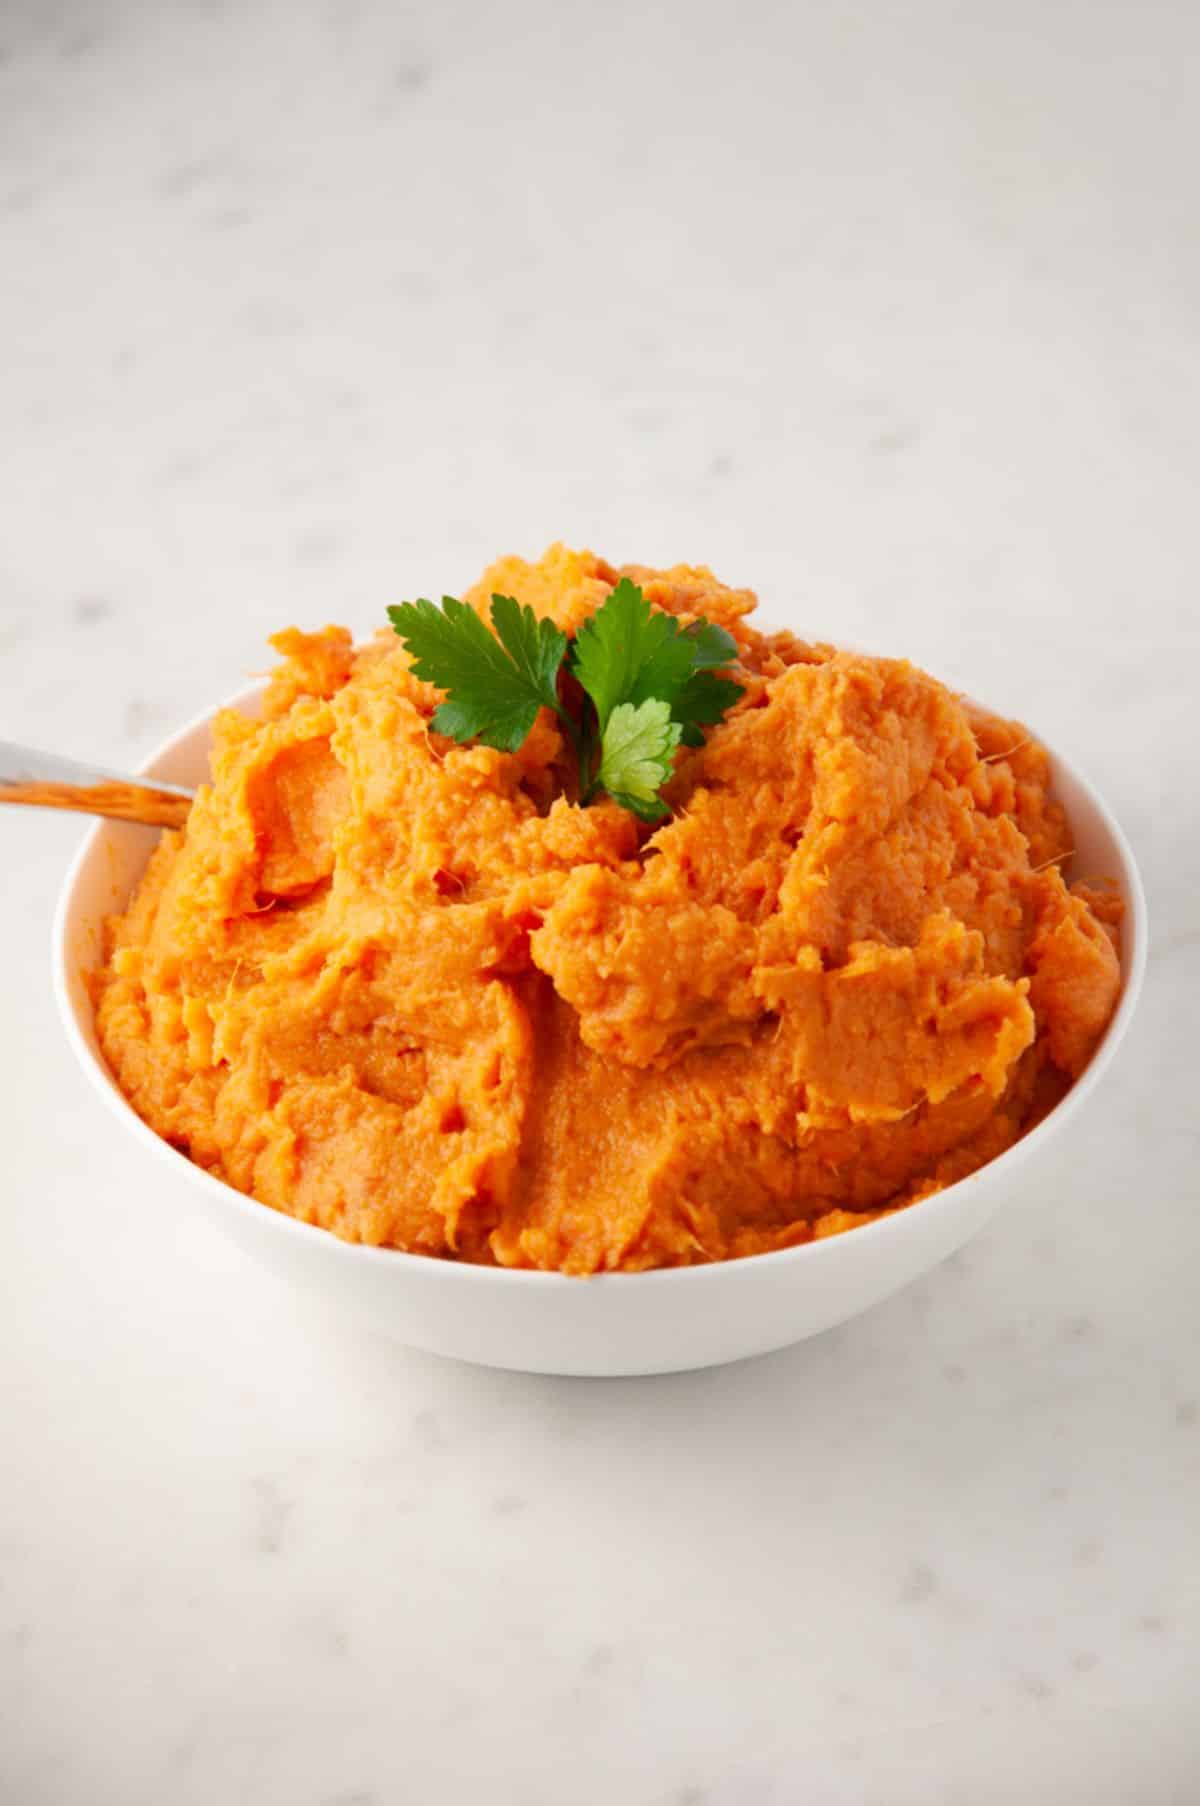 mashed sweet potatoes served in a white dish